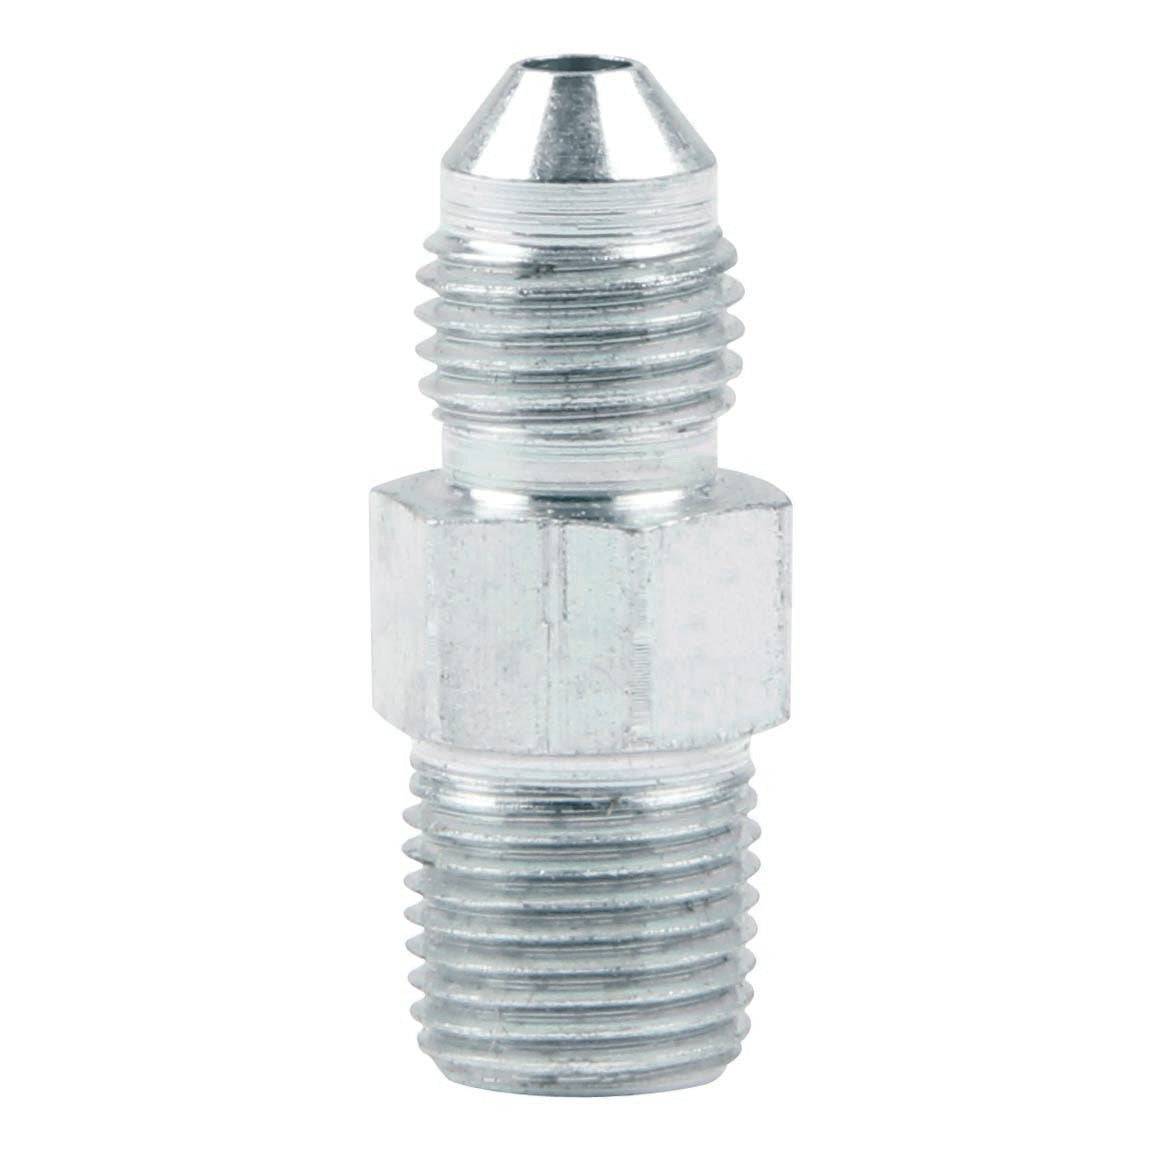 ALL50000 Fitting, Adapter, Straight, 3 AN Male to 1/8 in NPT Male, Steel, Zinc Oxide, Pair